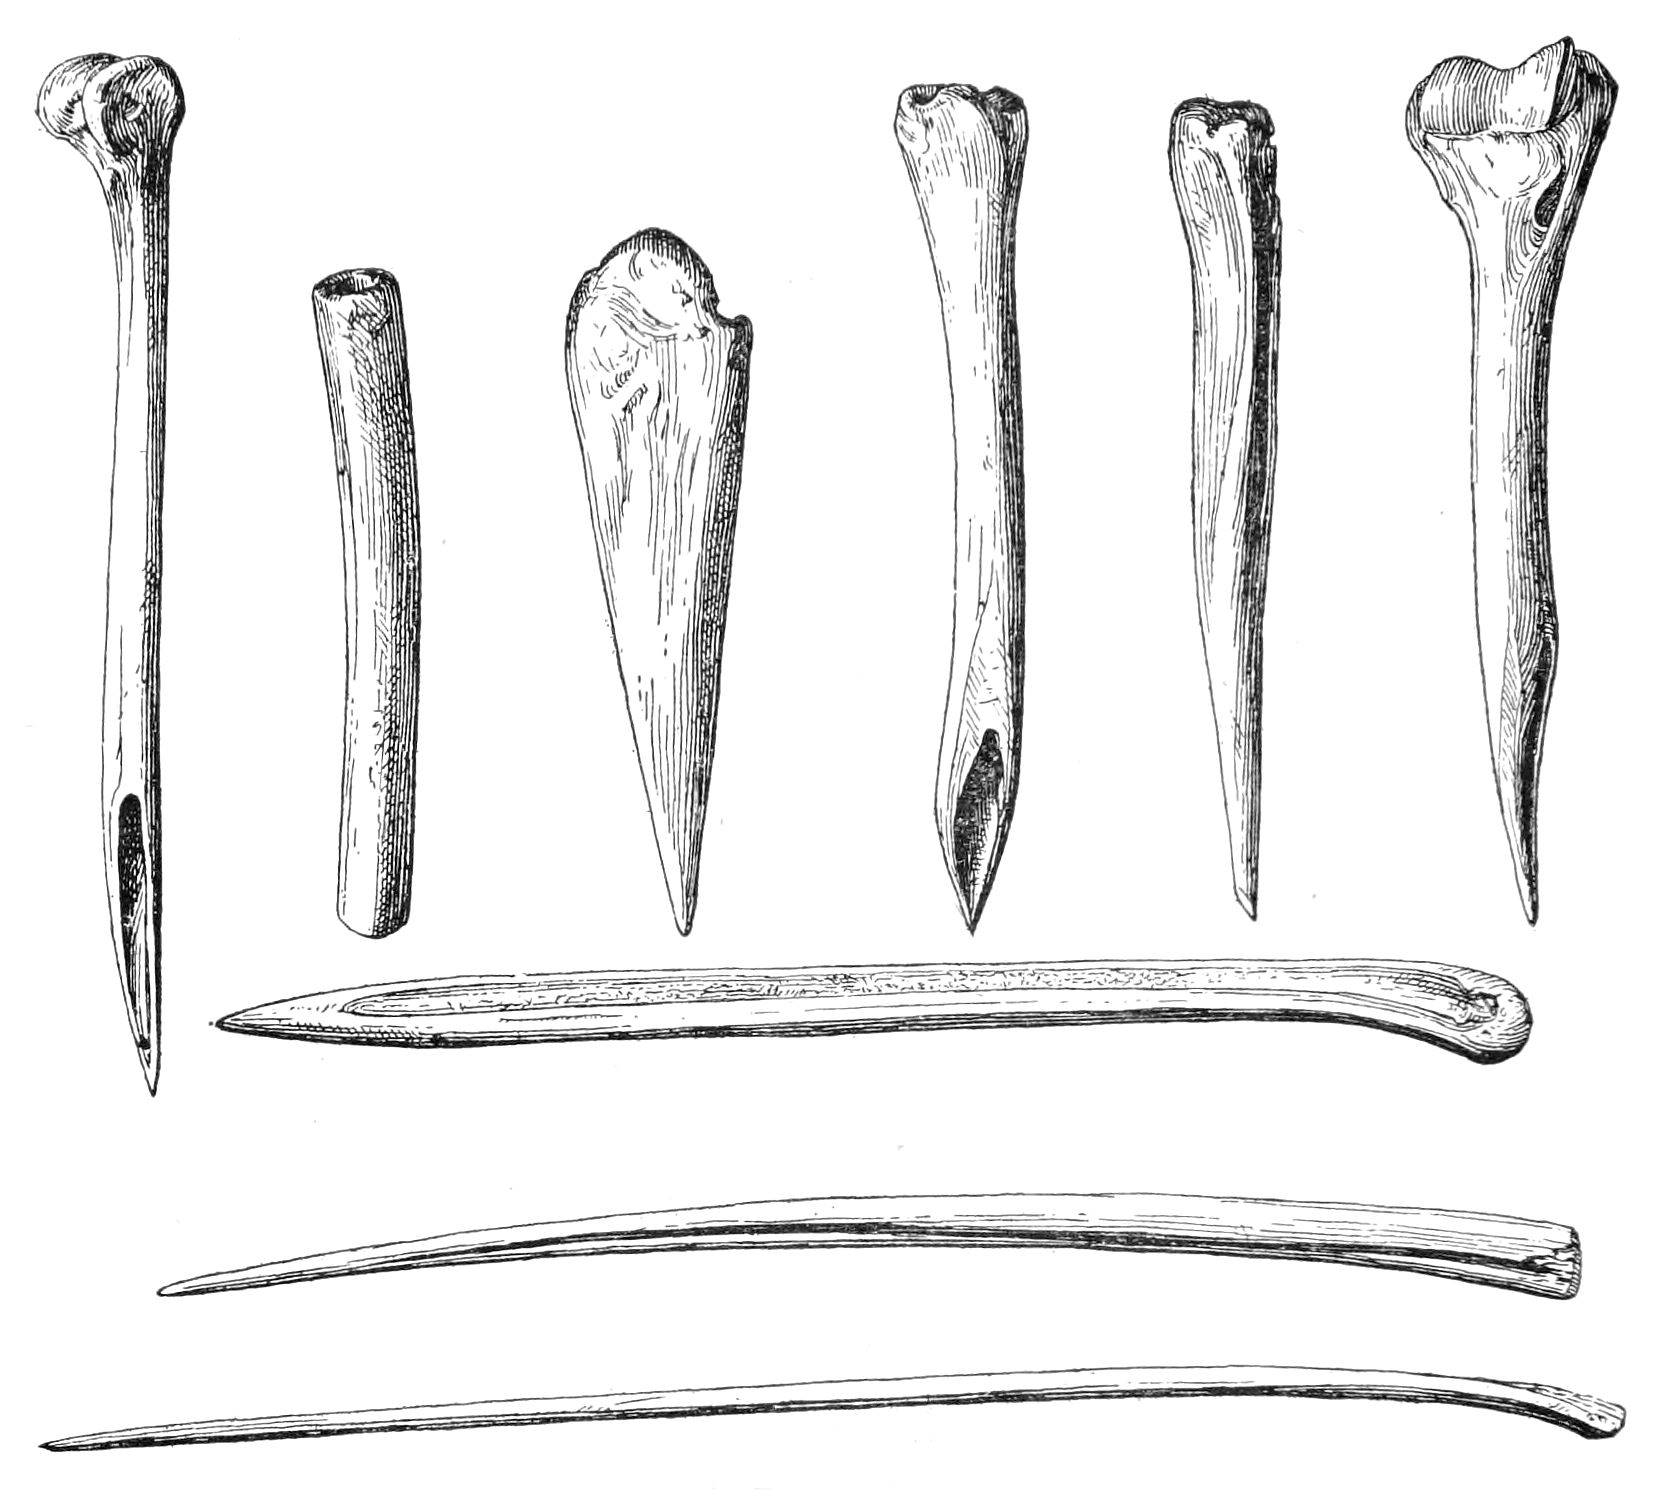 Fig. 31. Bone implements